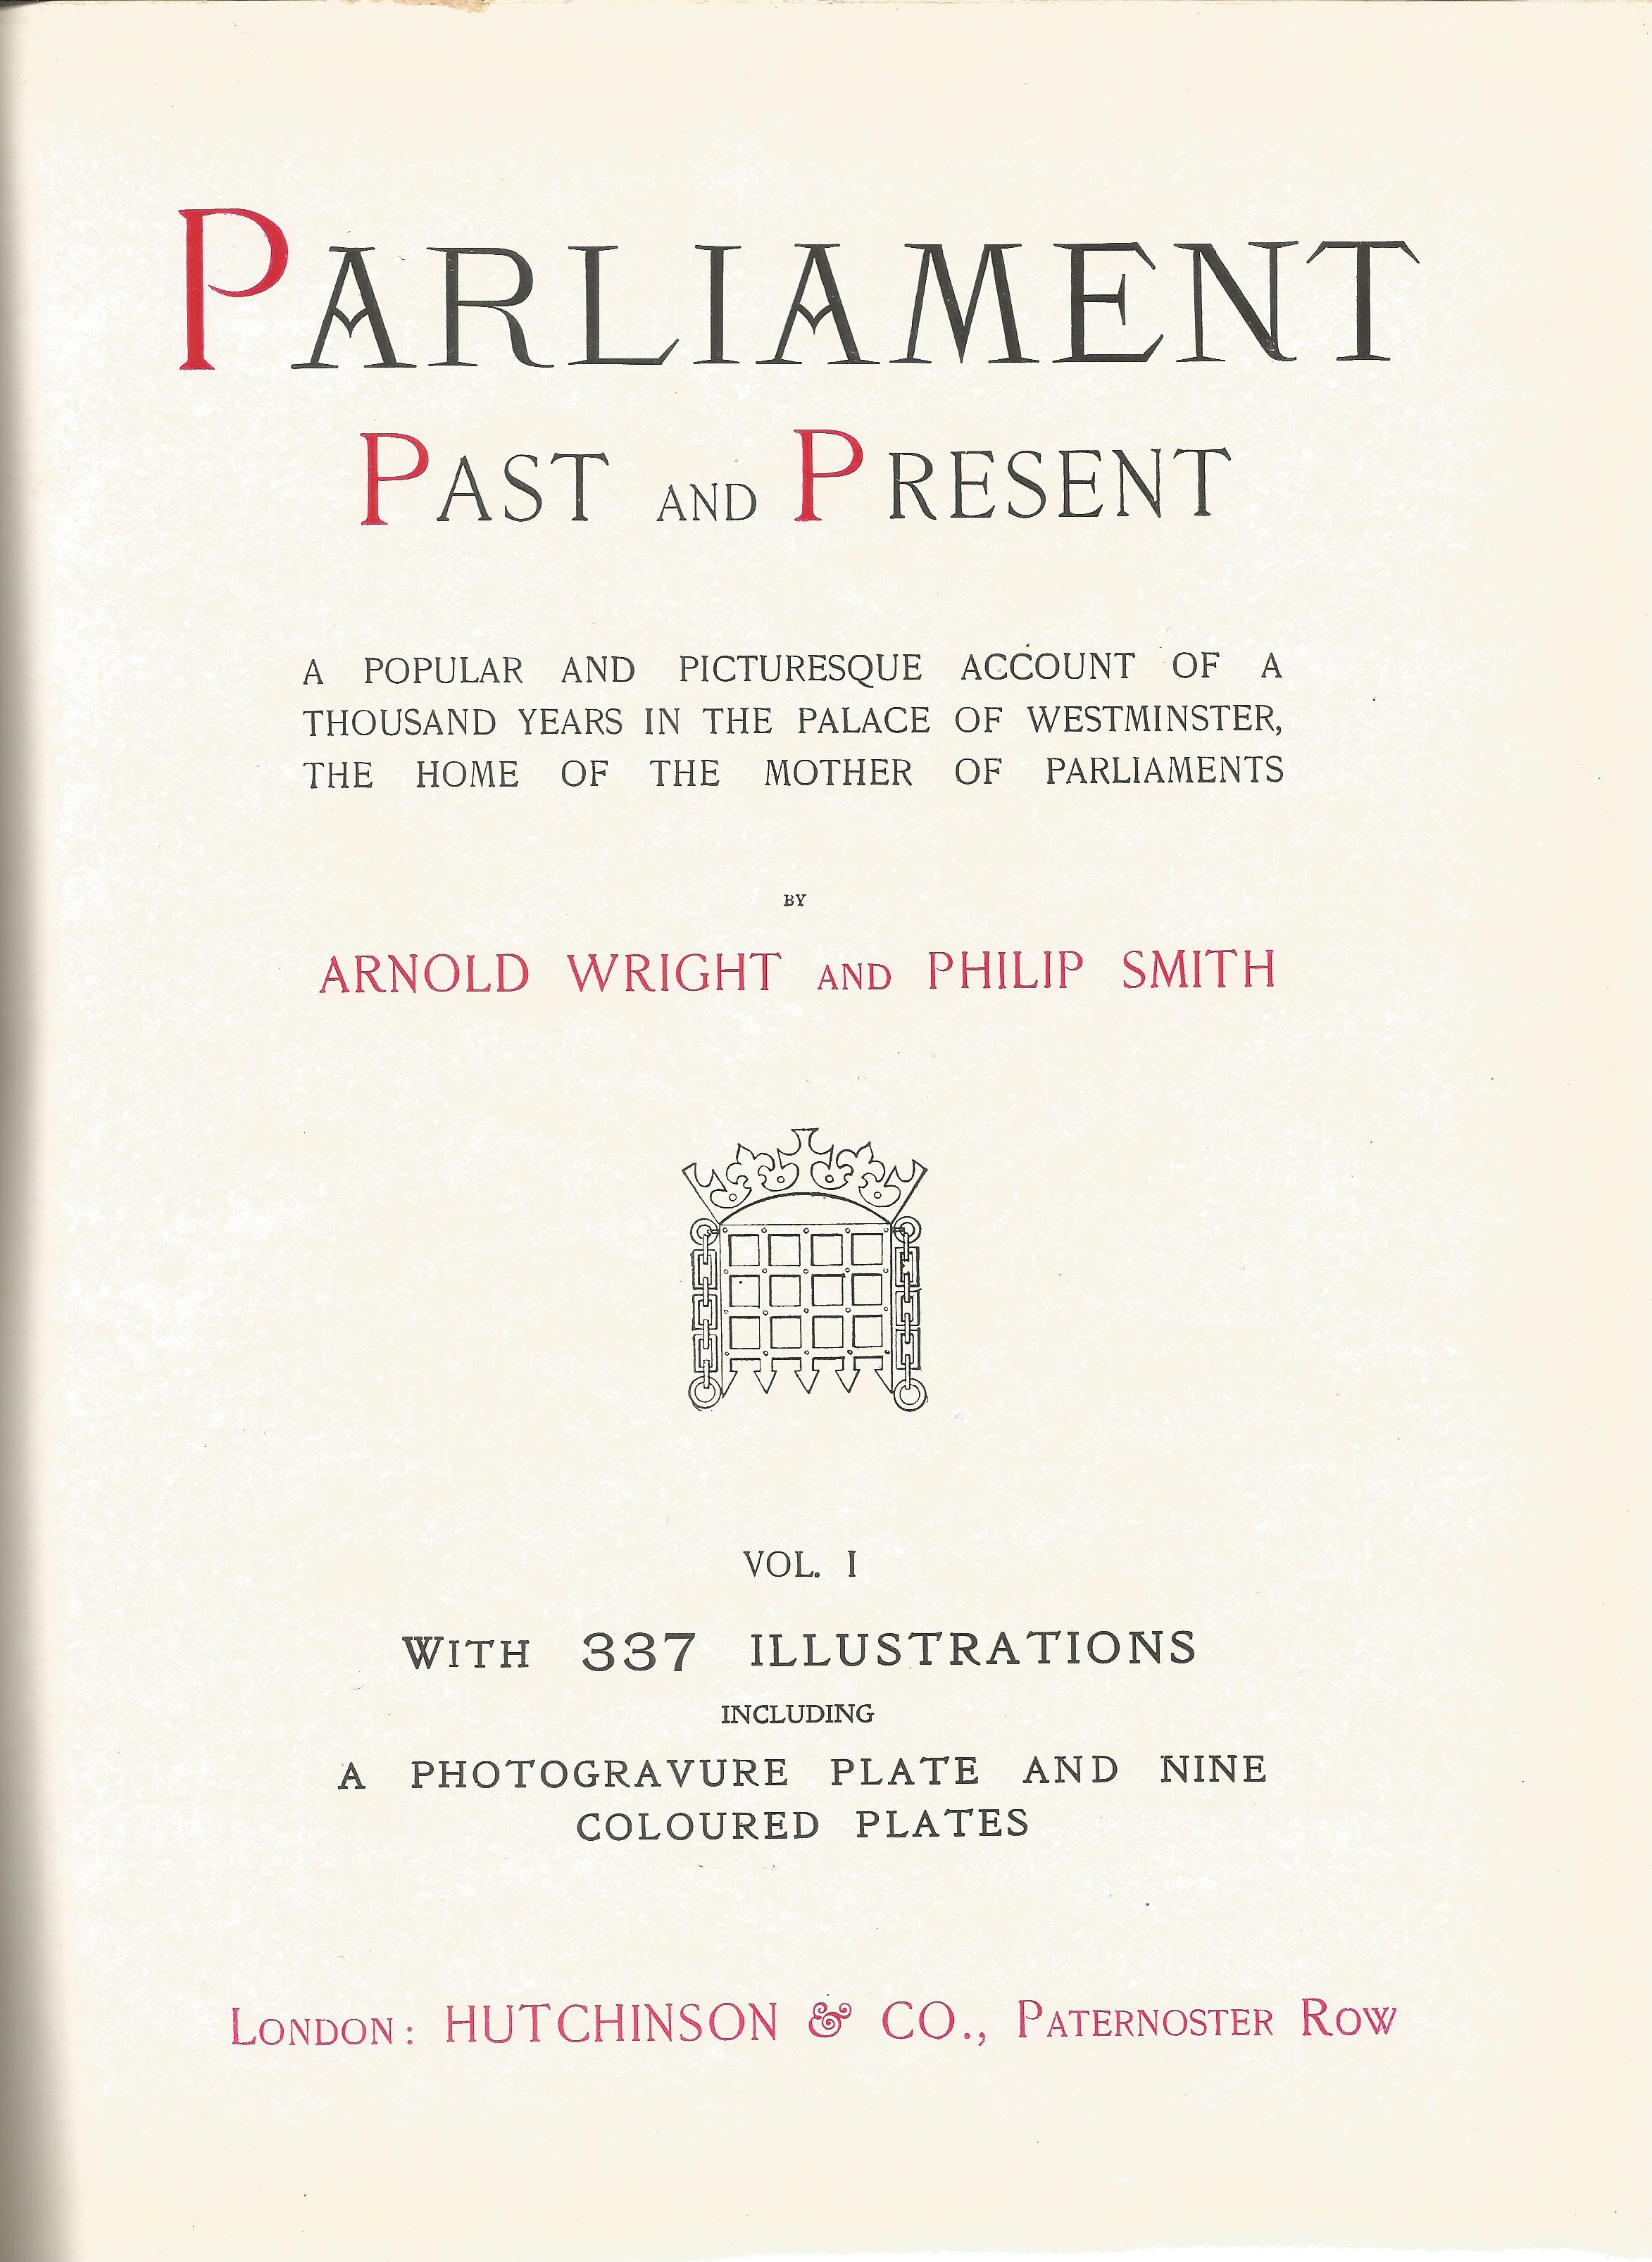 Parliament Past and Present by Arnold Wright and Philip Smith Hardback Book published by - Image 2 of 3